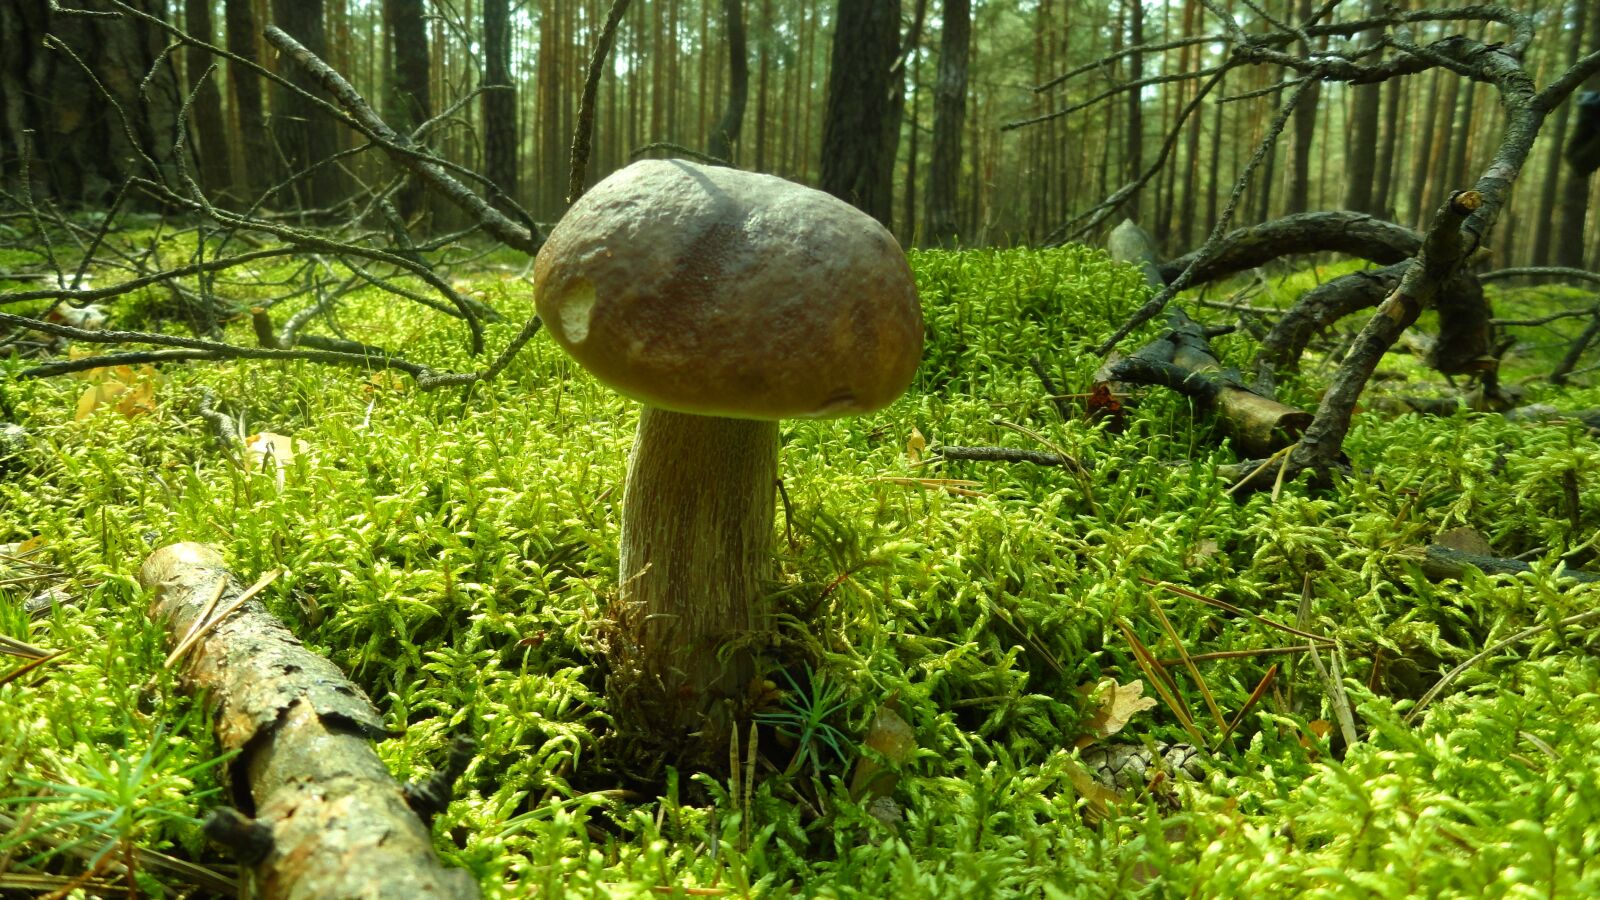 Sony Cyber-shot DSC-H70 sample photo. Mushroom, forest, nature photography